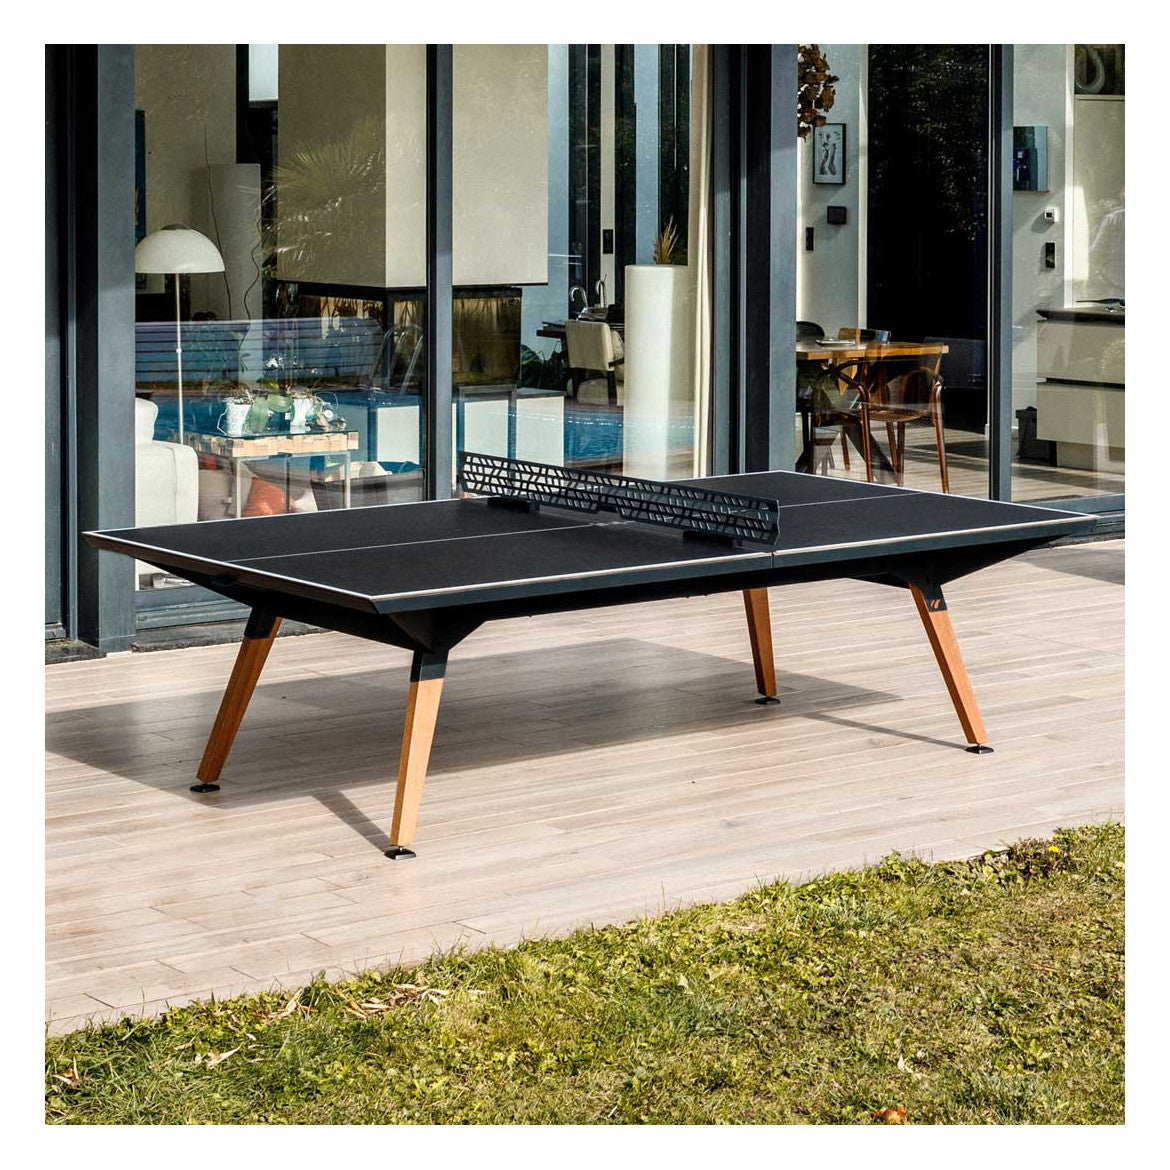 Cornilleau Lifestyle Black Outdoor Table Tennis Table